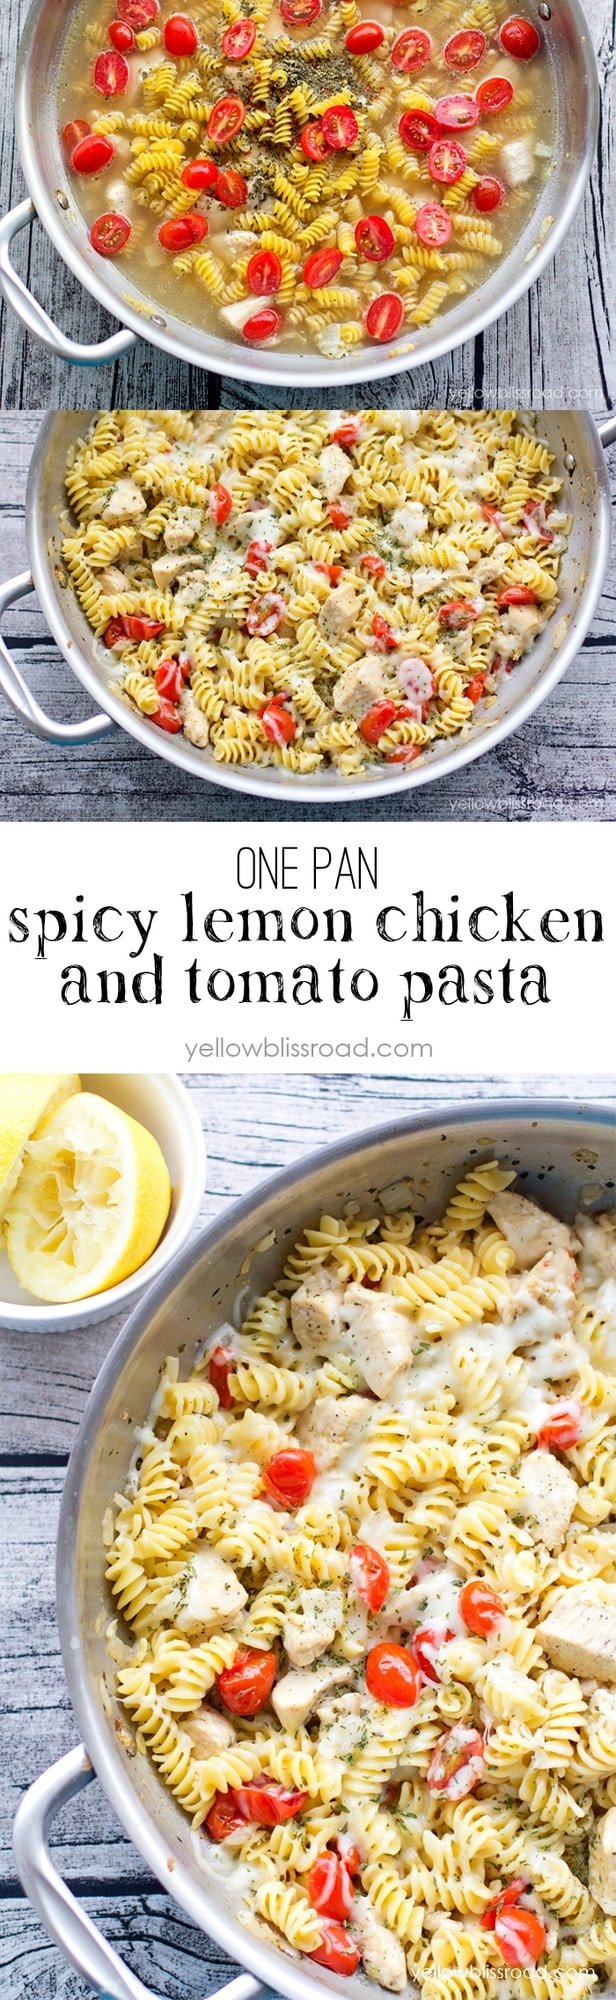 One Pan Spicy Lemon Chicken and Tomato Pasta - Cooks all in one pan and ready in under 20 minutes!